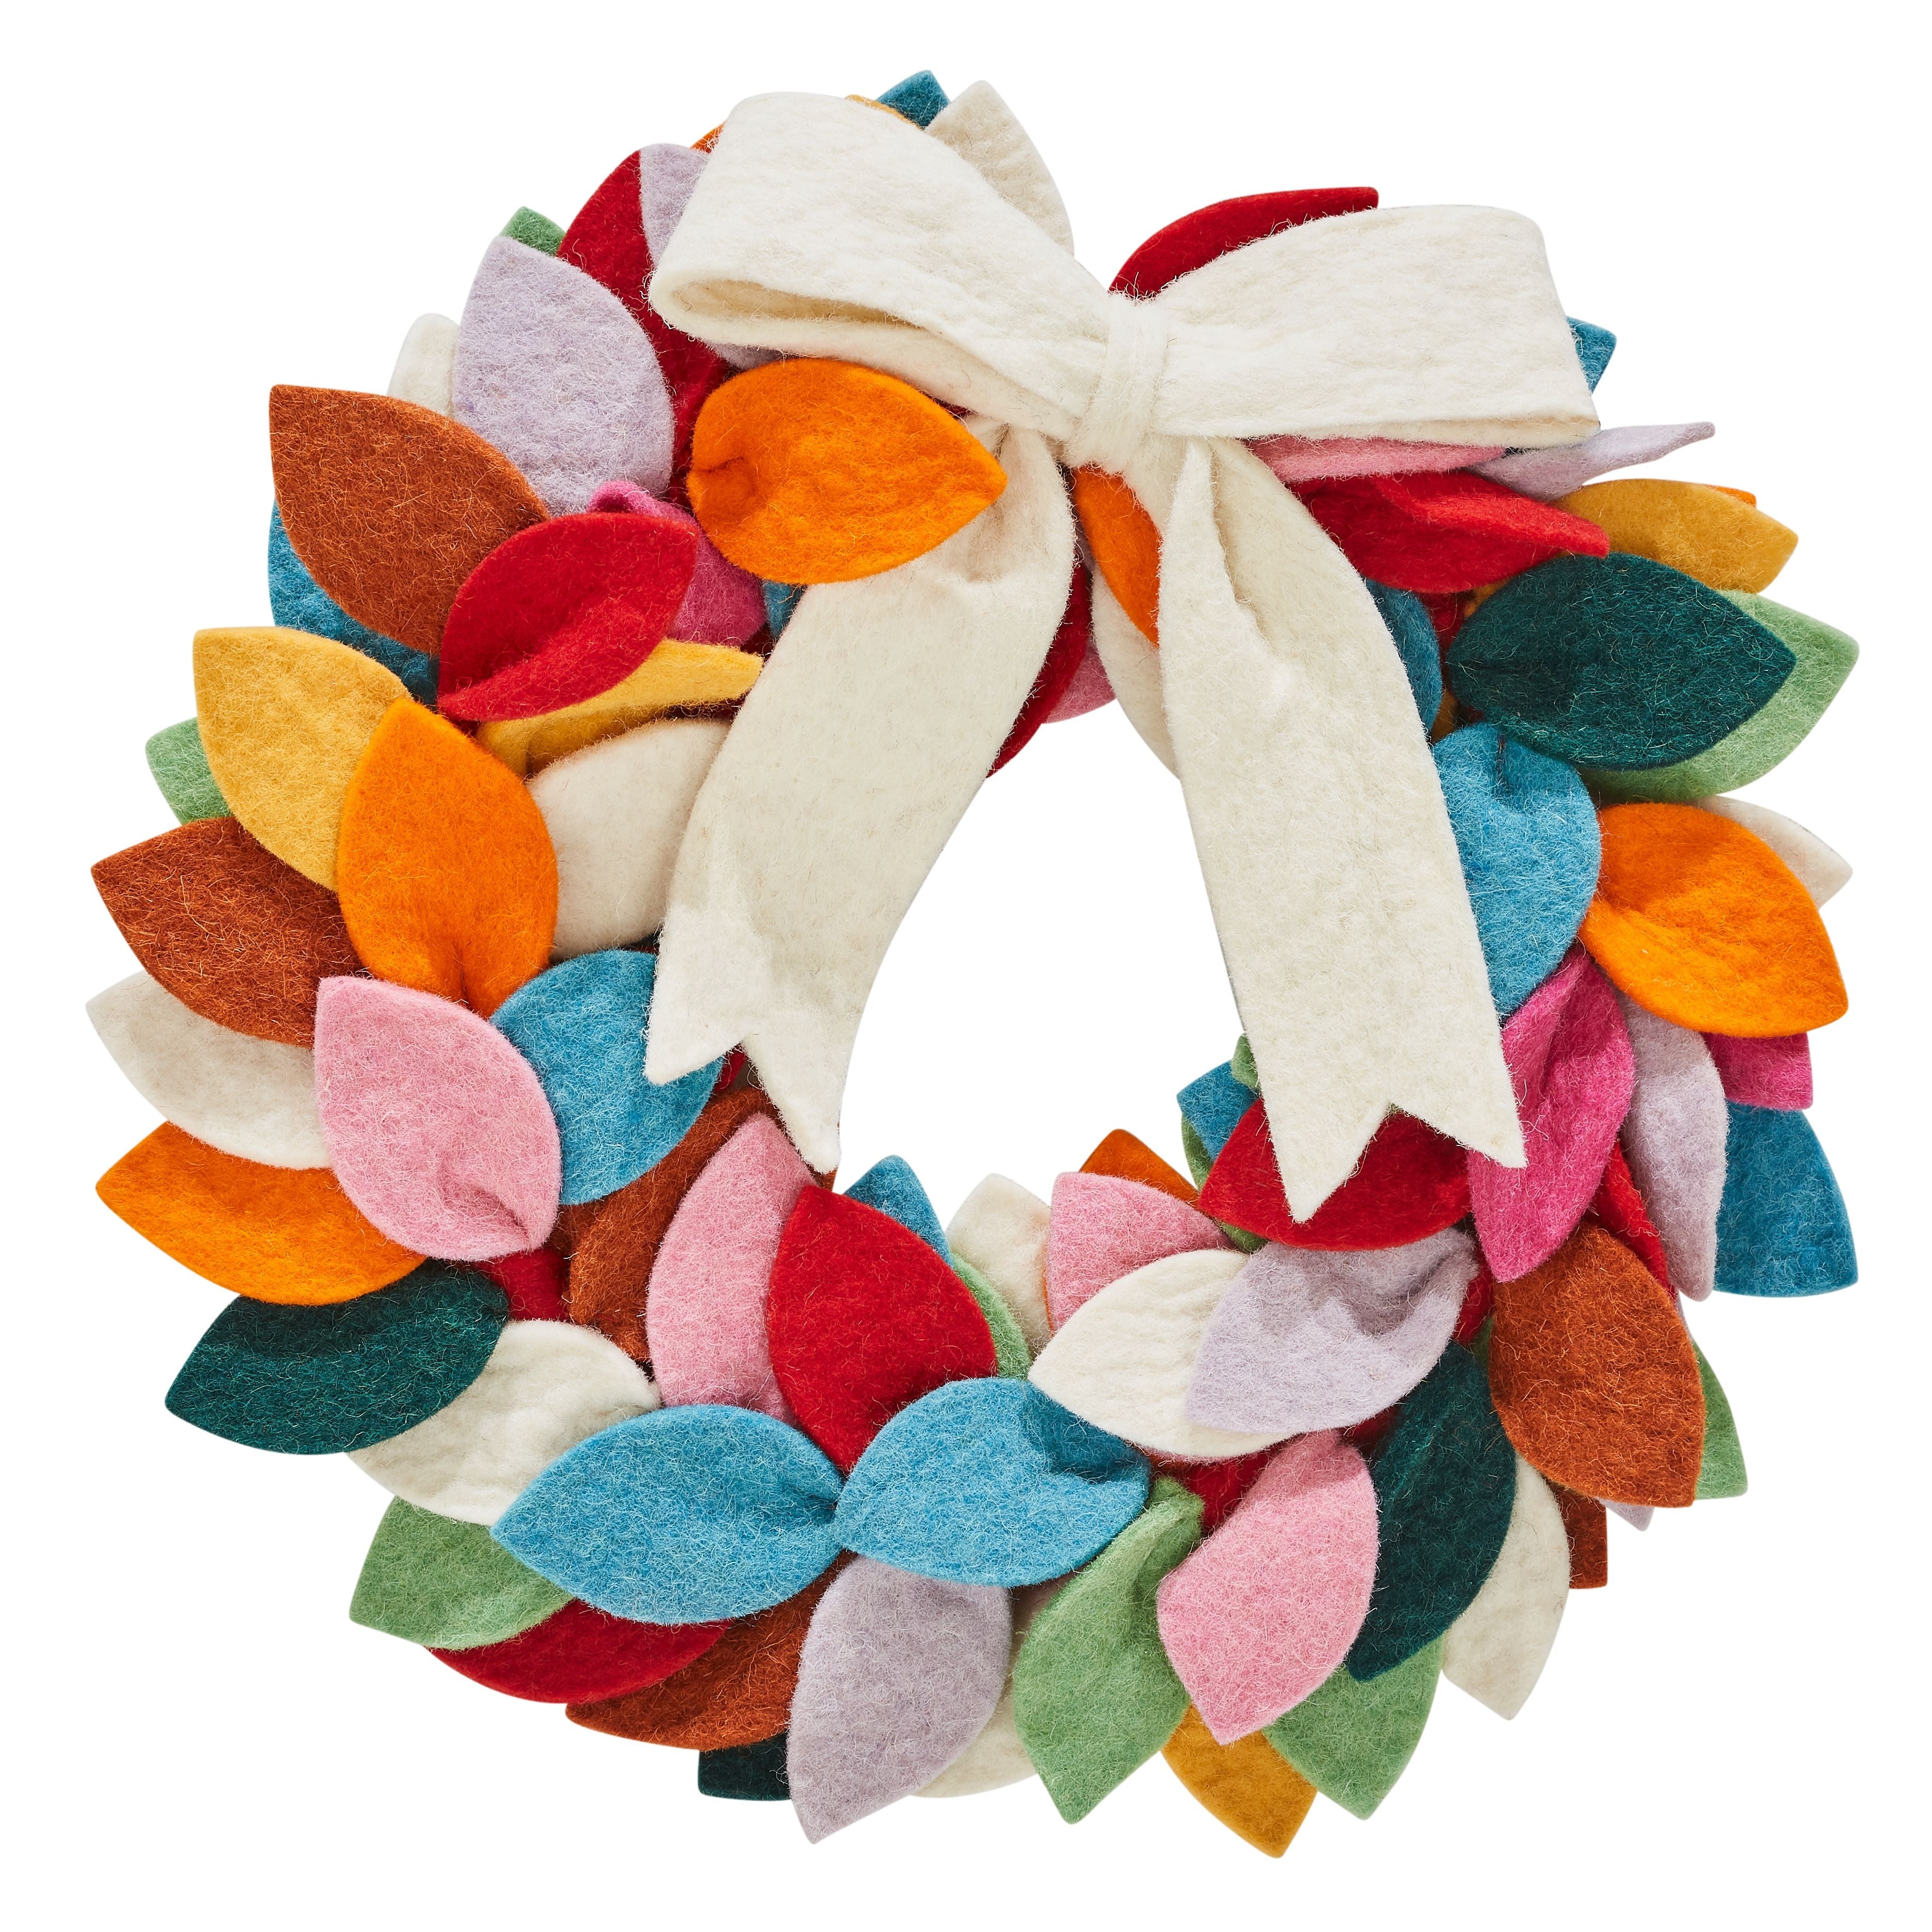 Multicolored Wreath With Cream Bow On Top Made Of Hand Felted Wool-12"